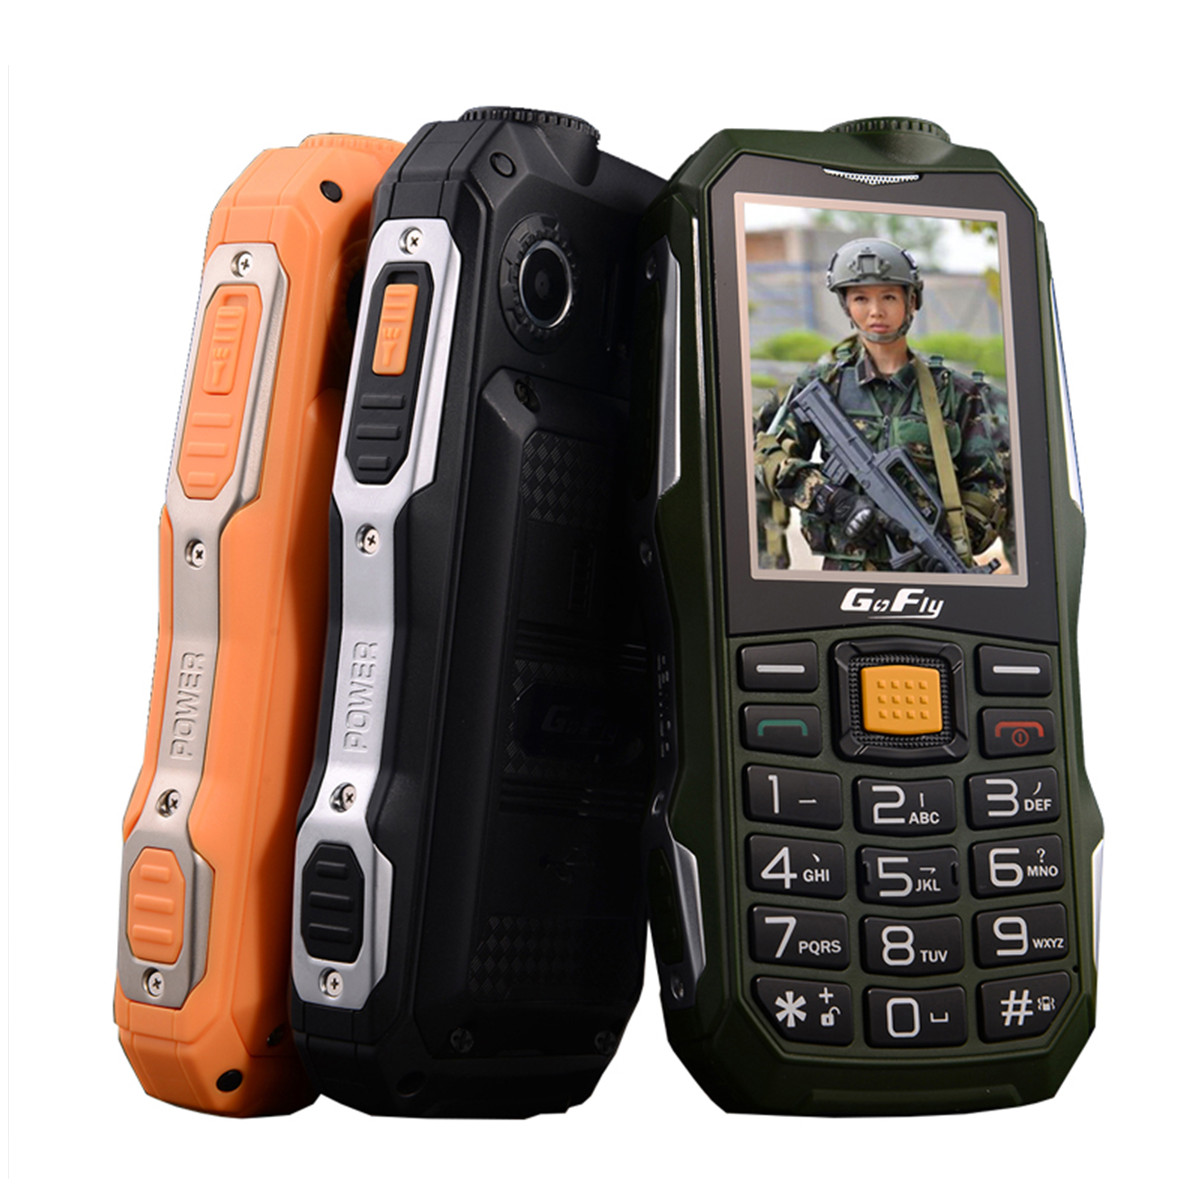 

GOFLY F7000 2.4 inch 4000mAh Power Bank FM bluetooth SOS Long Standby Rugged Feature Phone